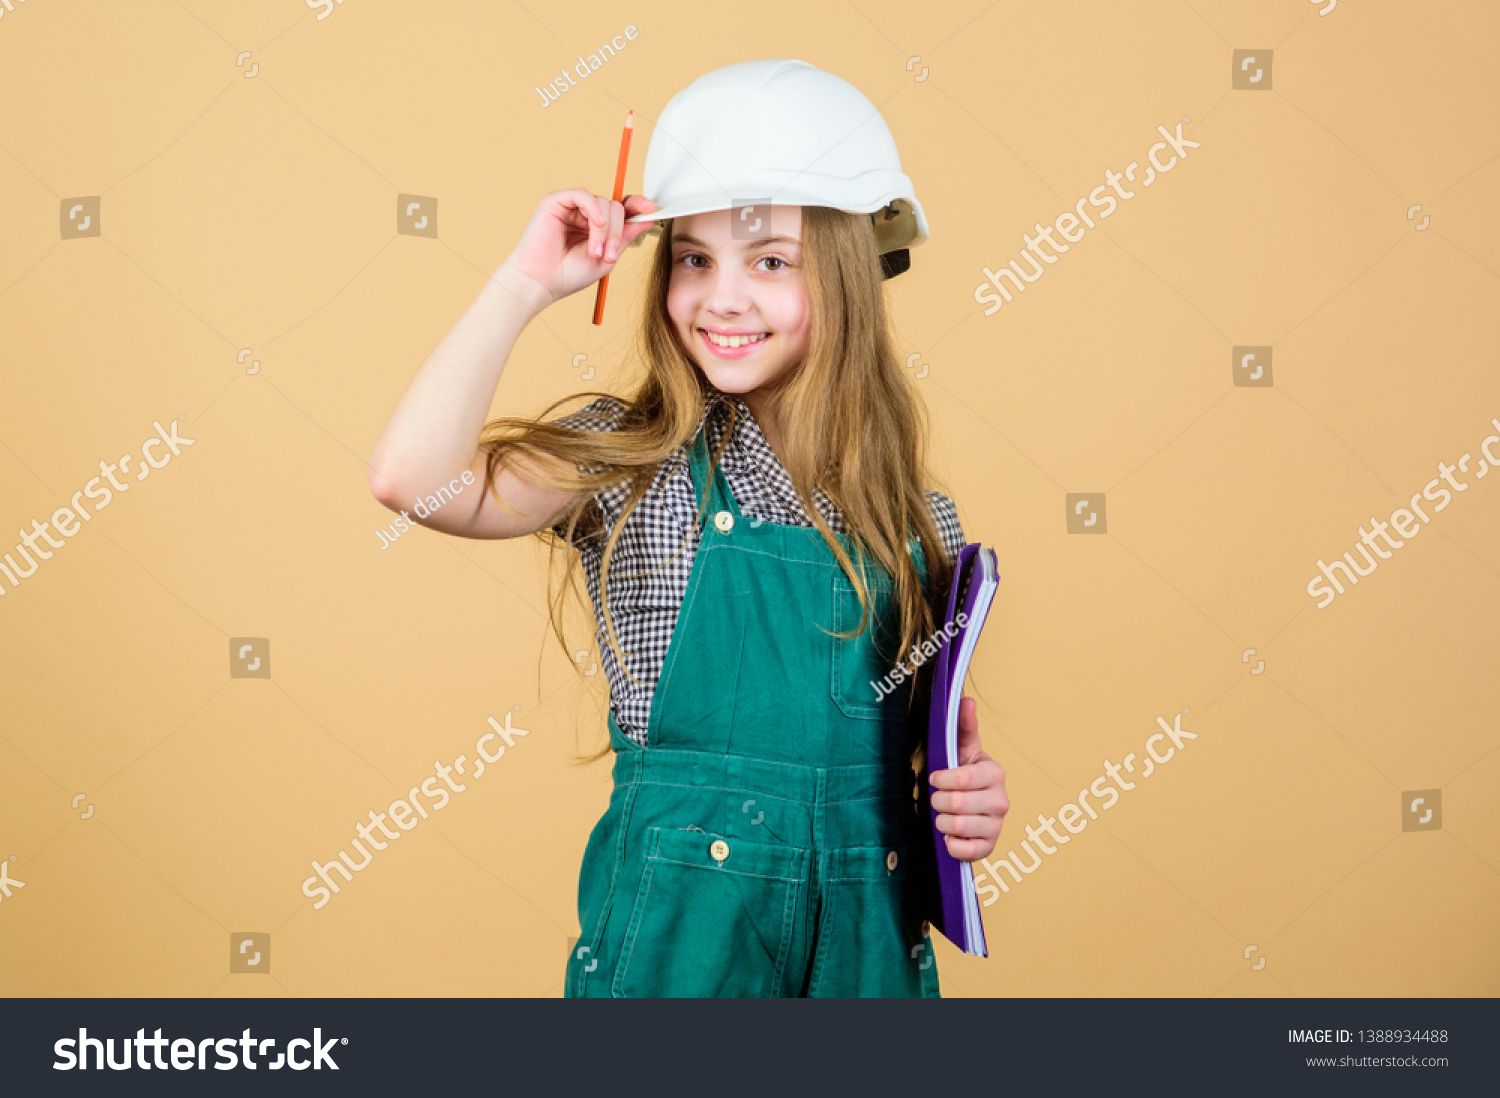 small girl repairing in workshop. Foreman inspector. Repair. Child care development. Safety expert. Future profession. Builder engineer architect. Kid worker in hard hat. This is my place #1388934488